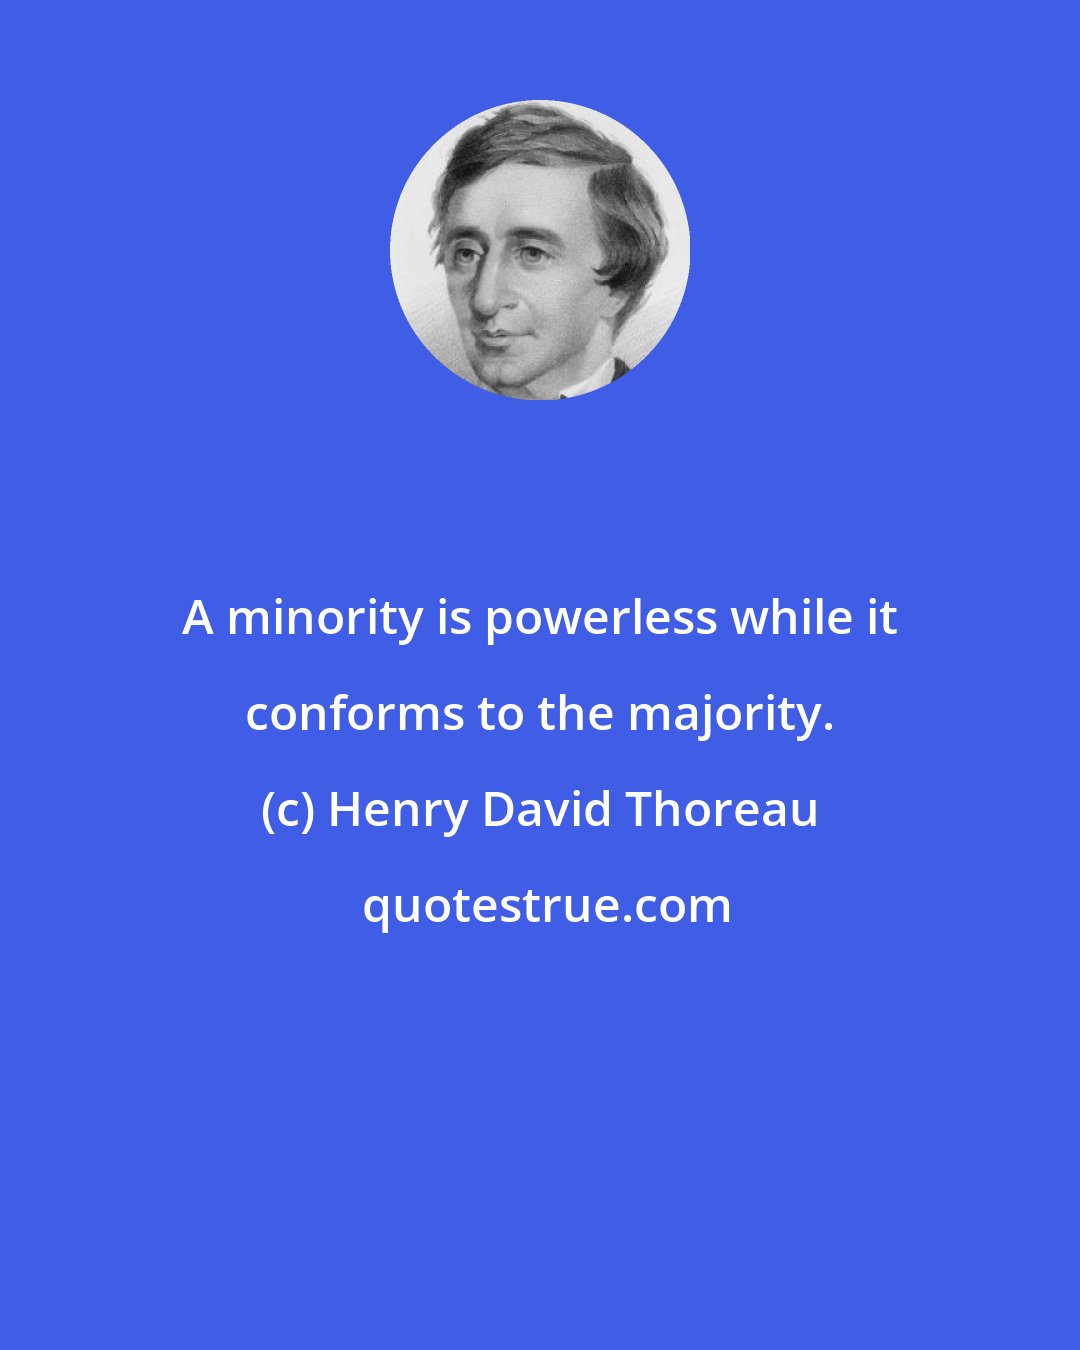 Henry David Thoreau: A minority is powerless while it conforms to the majority.